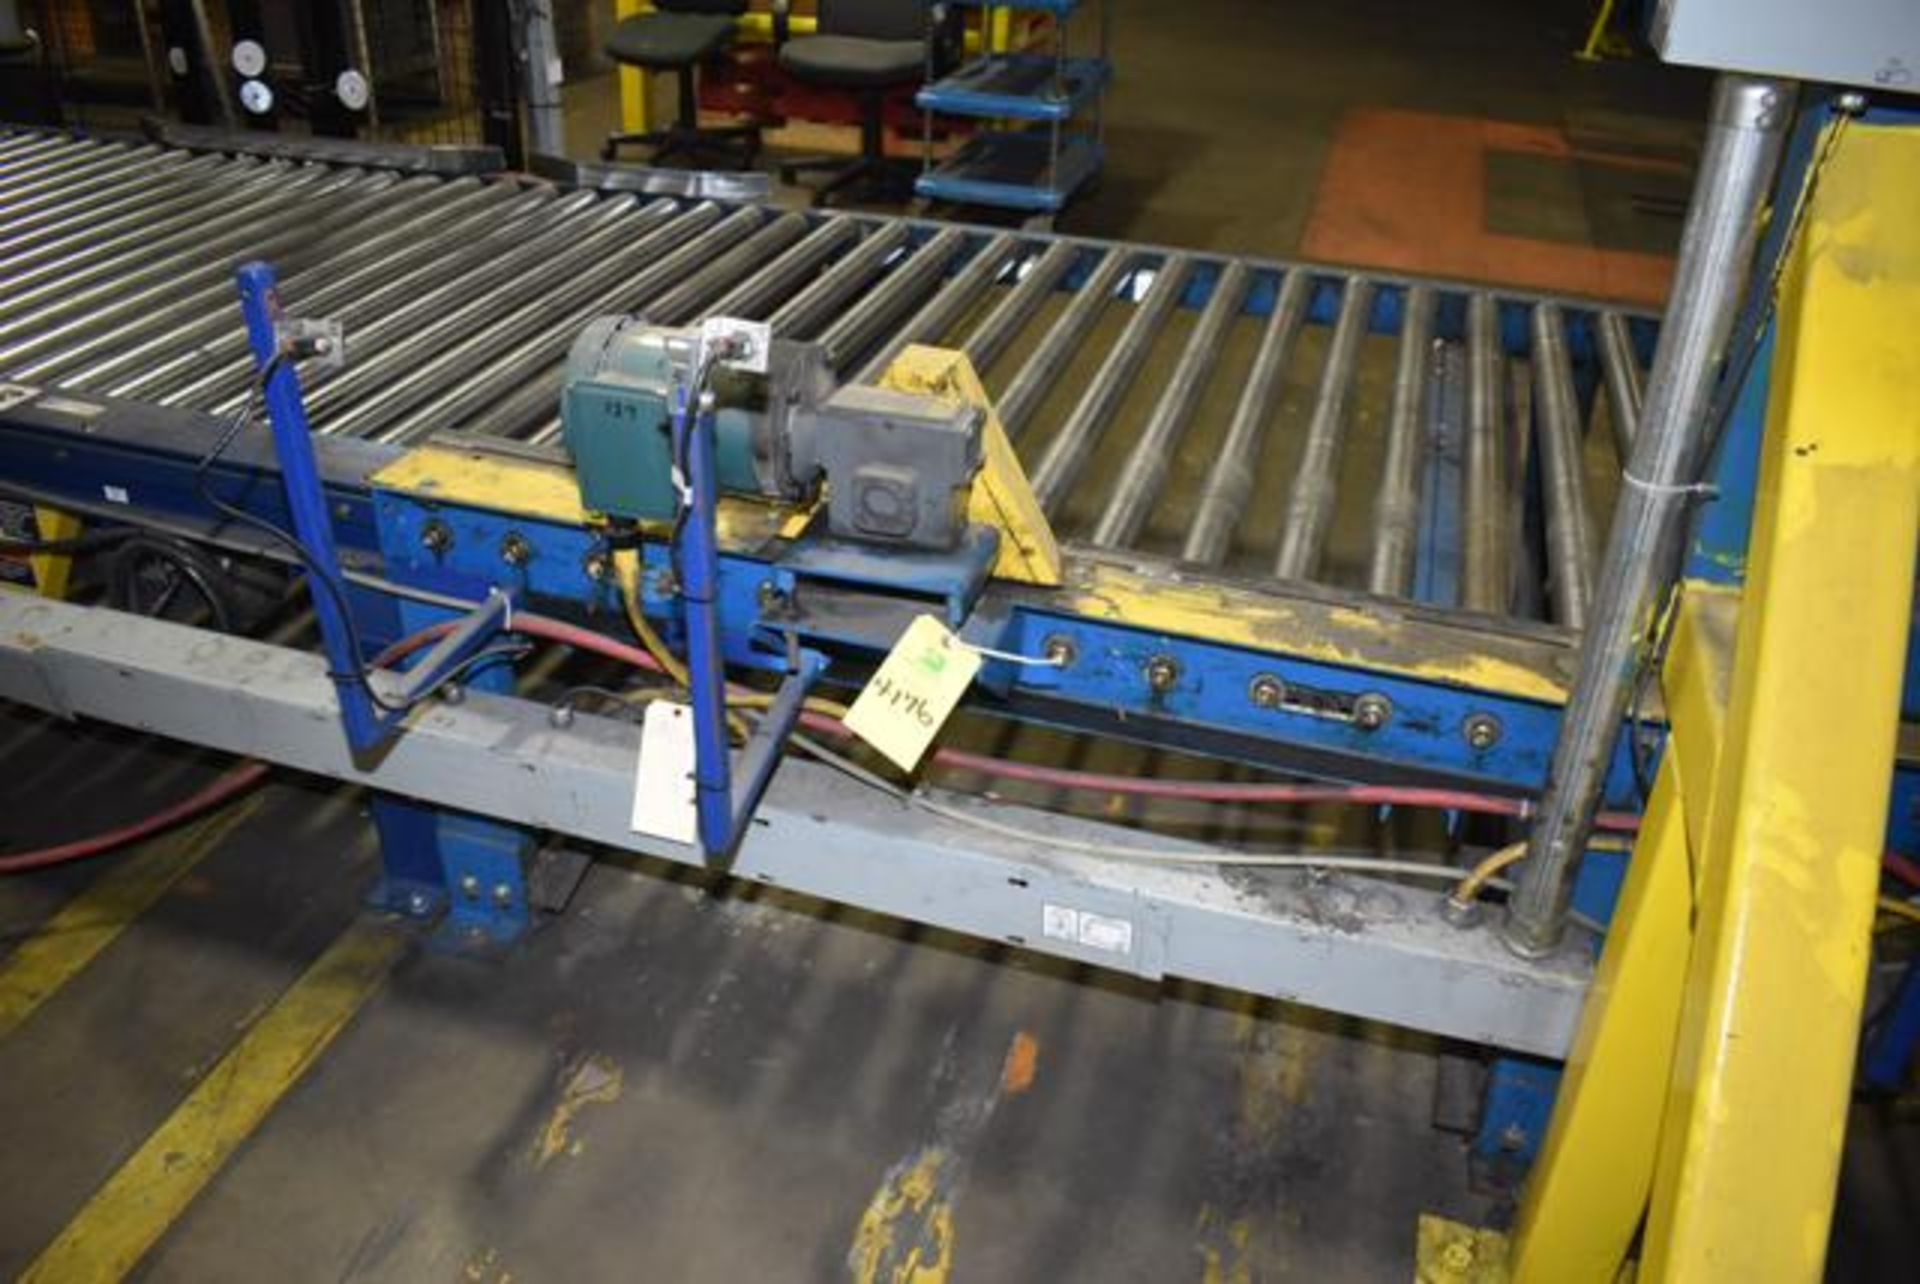 Alba Motorized Roller Conveyor, 52" Rollers x 60" Length Section, RIGGING FEE: $75